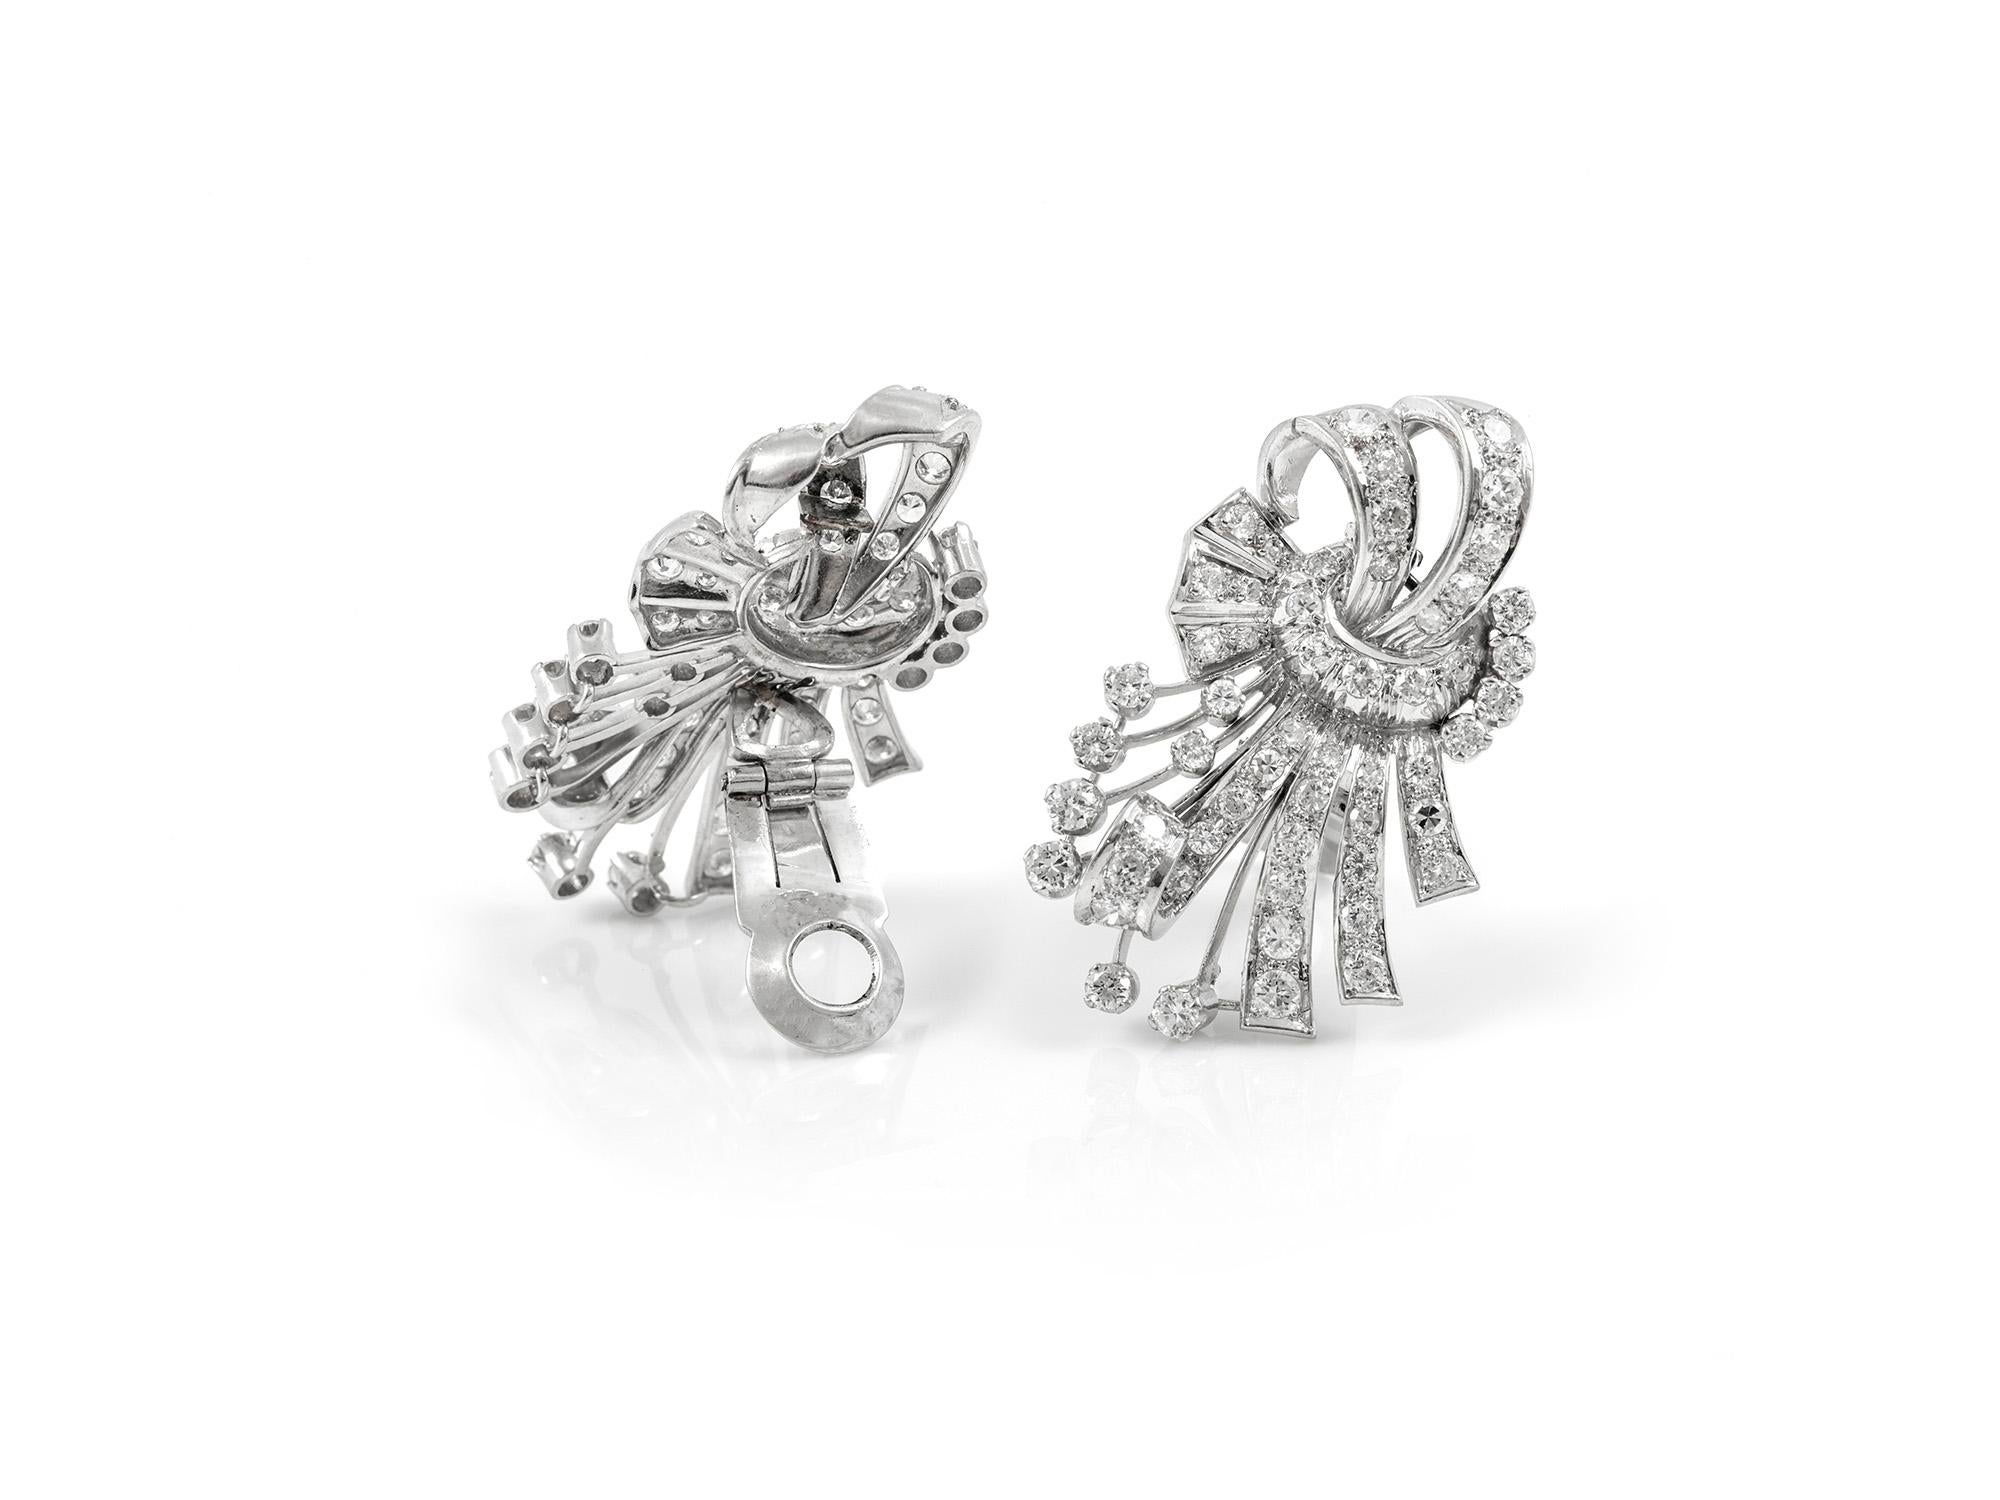 The earrings are finely crafted in platinum with diamonds weighing approximately total of 6.00 carat.